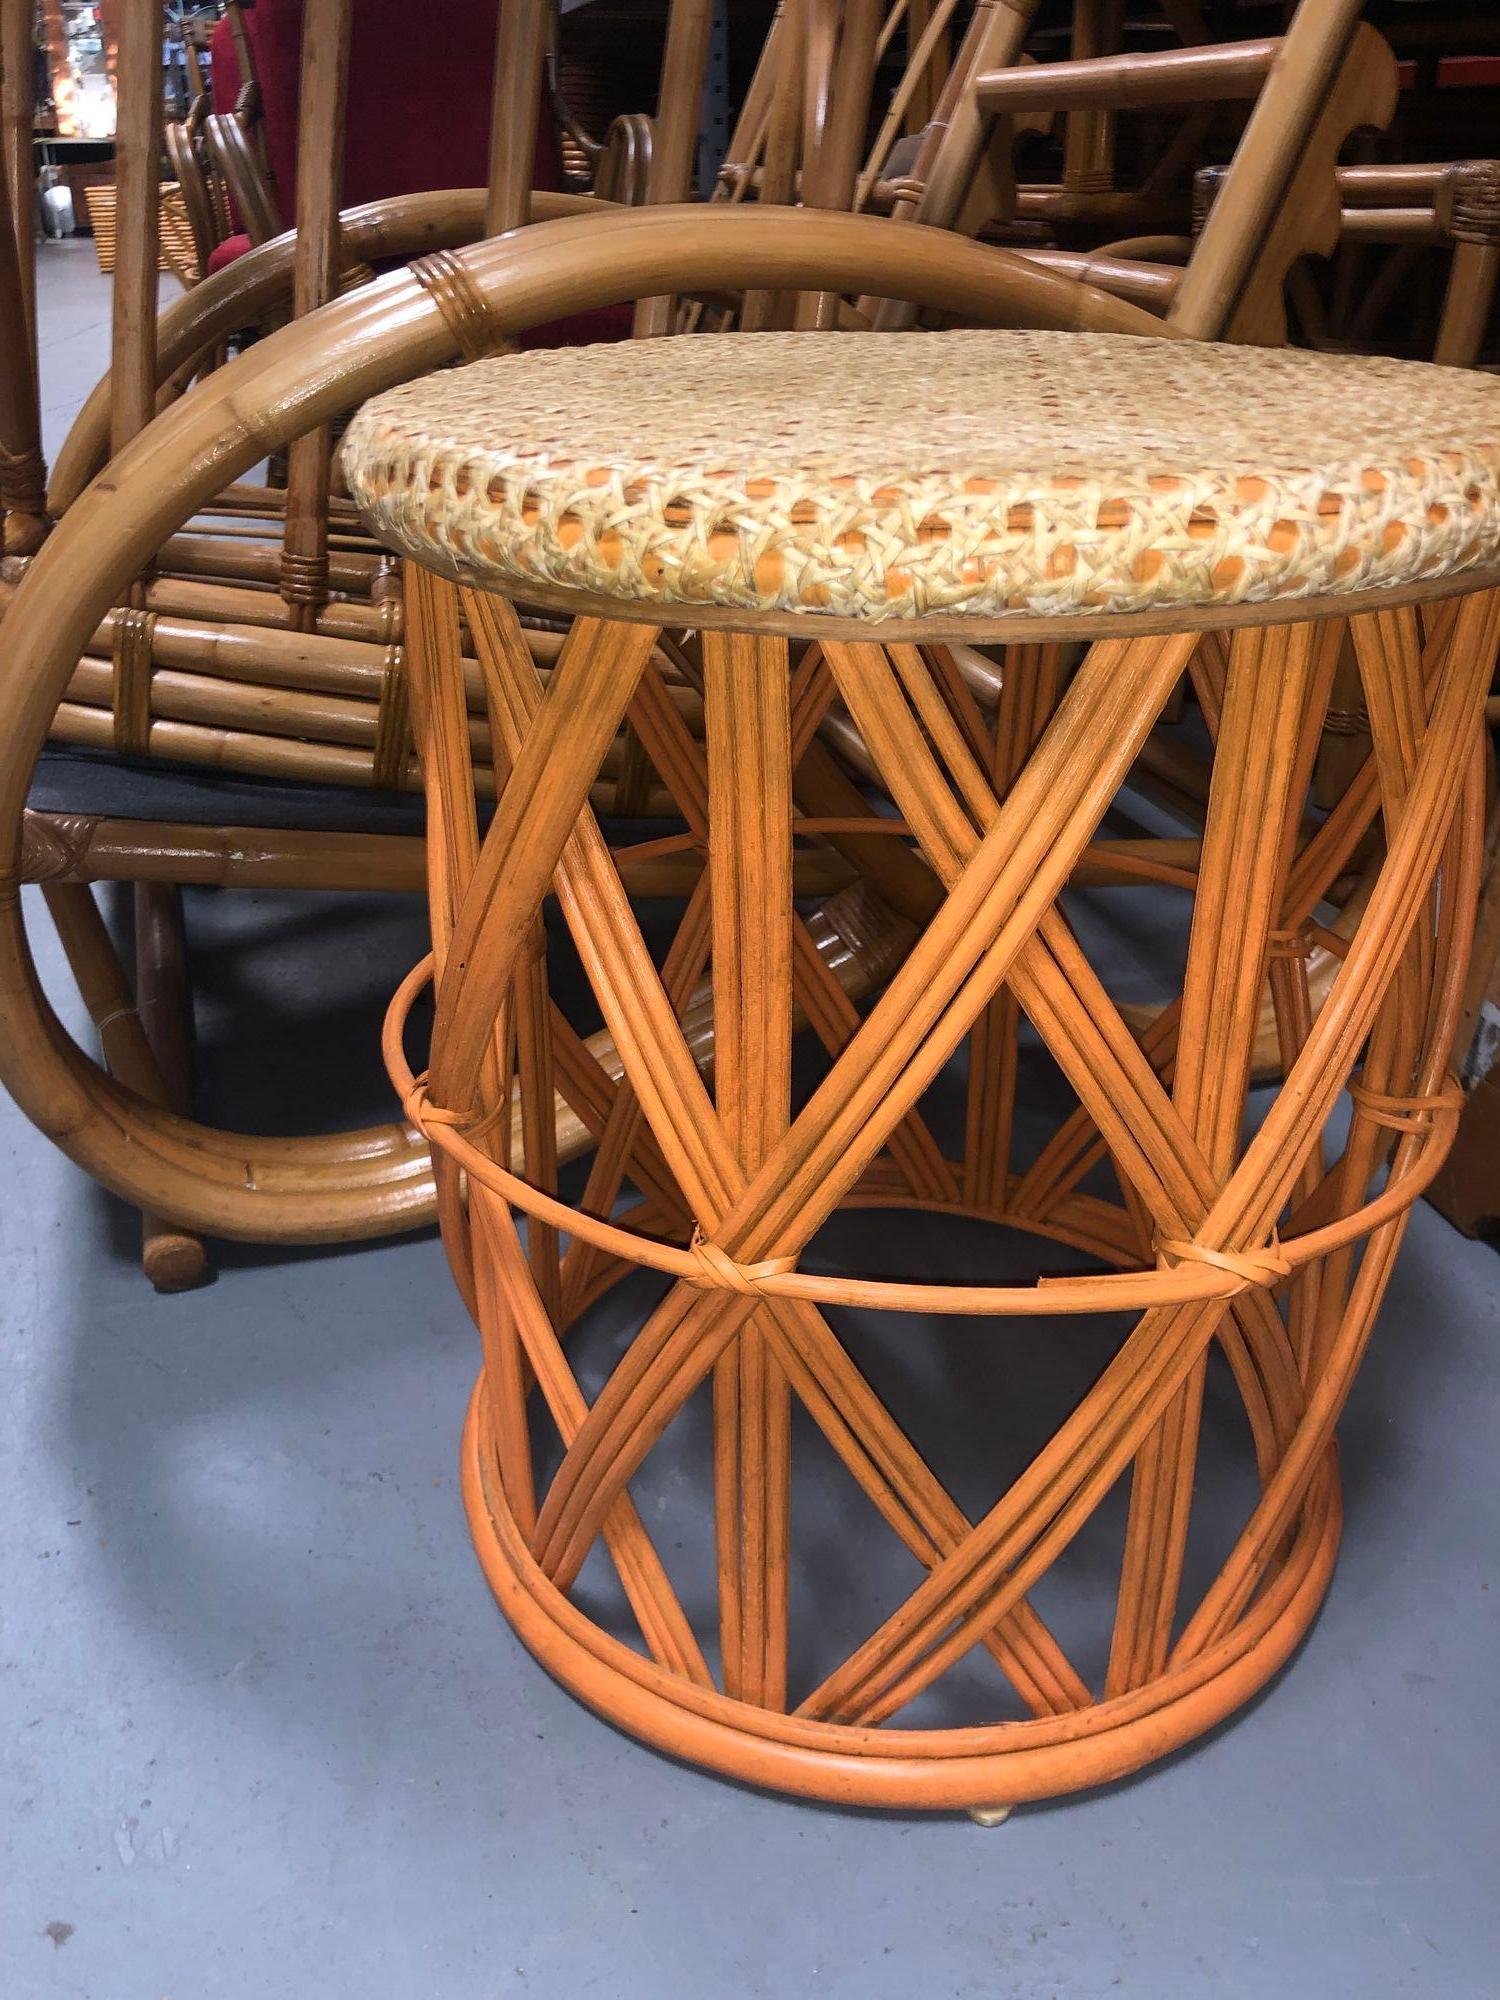 This restored rattan orange and natural cane table offers a stylish and versatile accent to any space. With its vibrant orange and natural cane top, it brings warmth and character to the room. Perfect as a side table or a plant stand, it combines